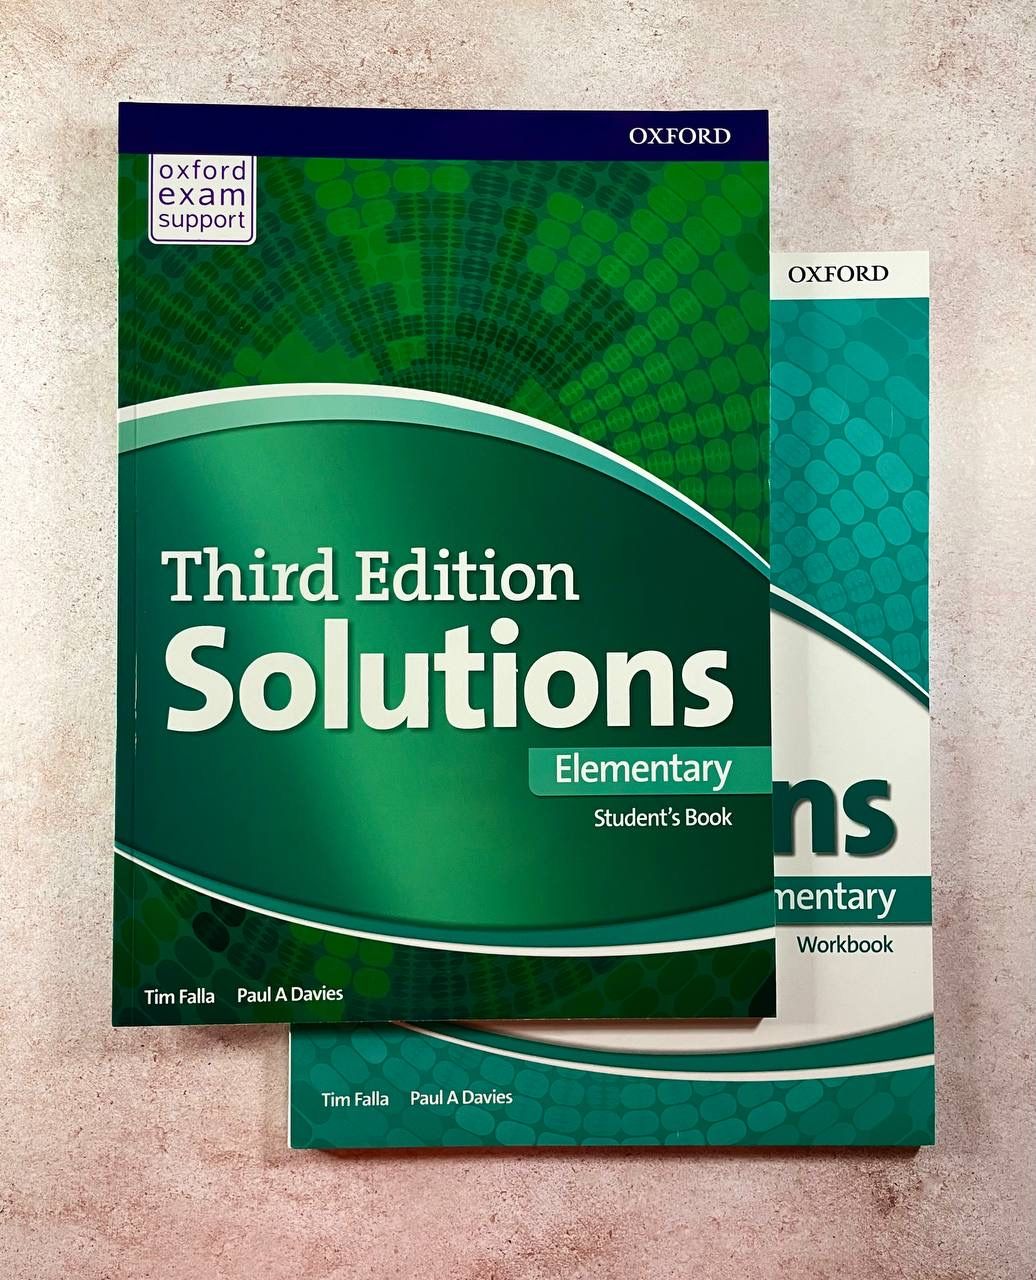 Solutions elementary 6 класс. Учебник solutions Elementary. Учебники third Edition solutions Elementary Workbook. Solutions Elementary Workbook гдз. Solutions Elementary student's book.